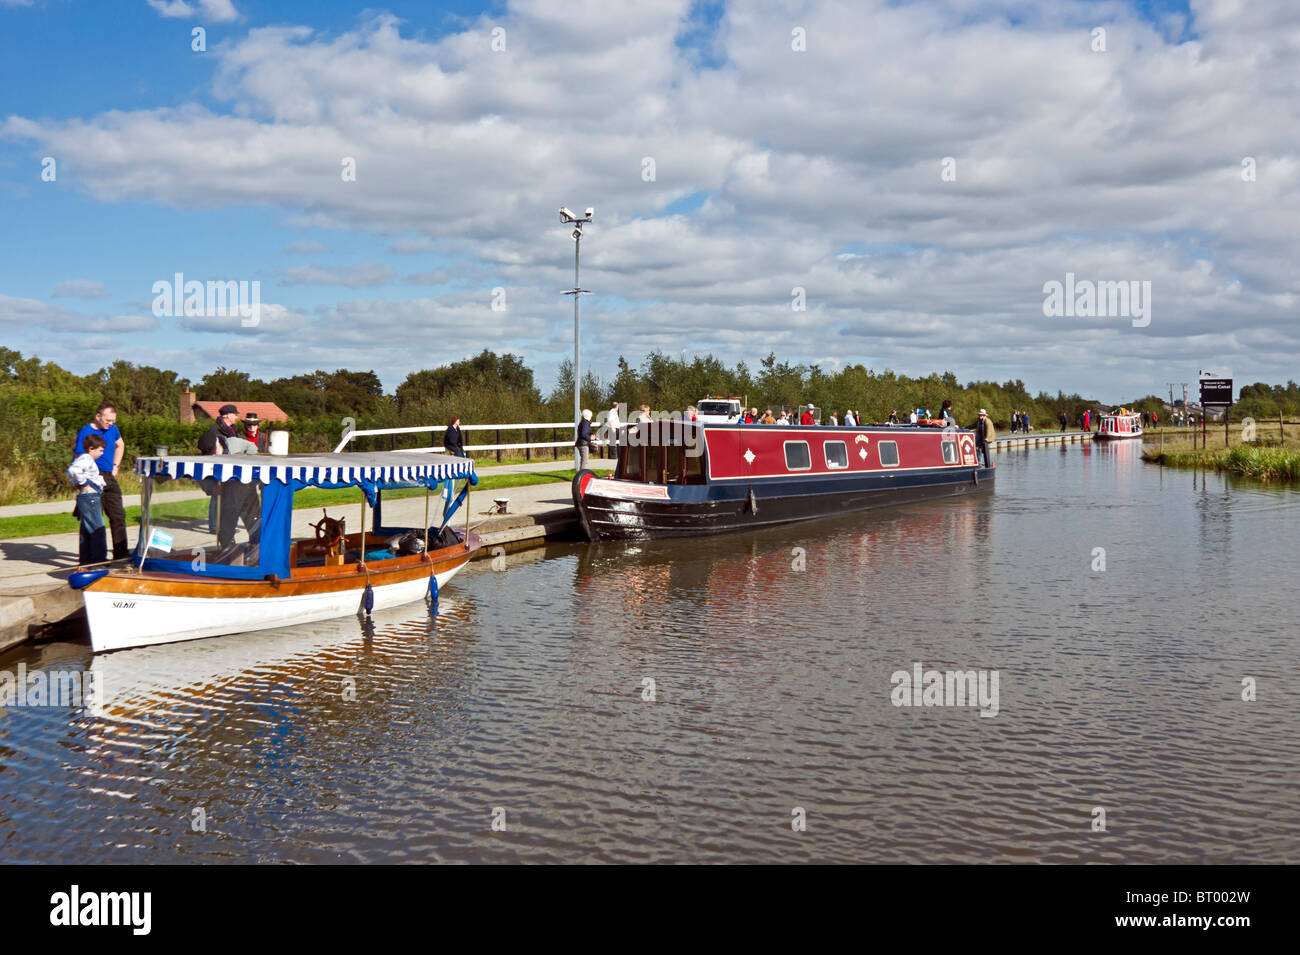 Canal boats arriving at the locks at the Union Canal near the junction with the Forth & Clyde Canal at Falkirk Wheel Stock Photo